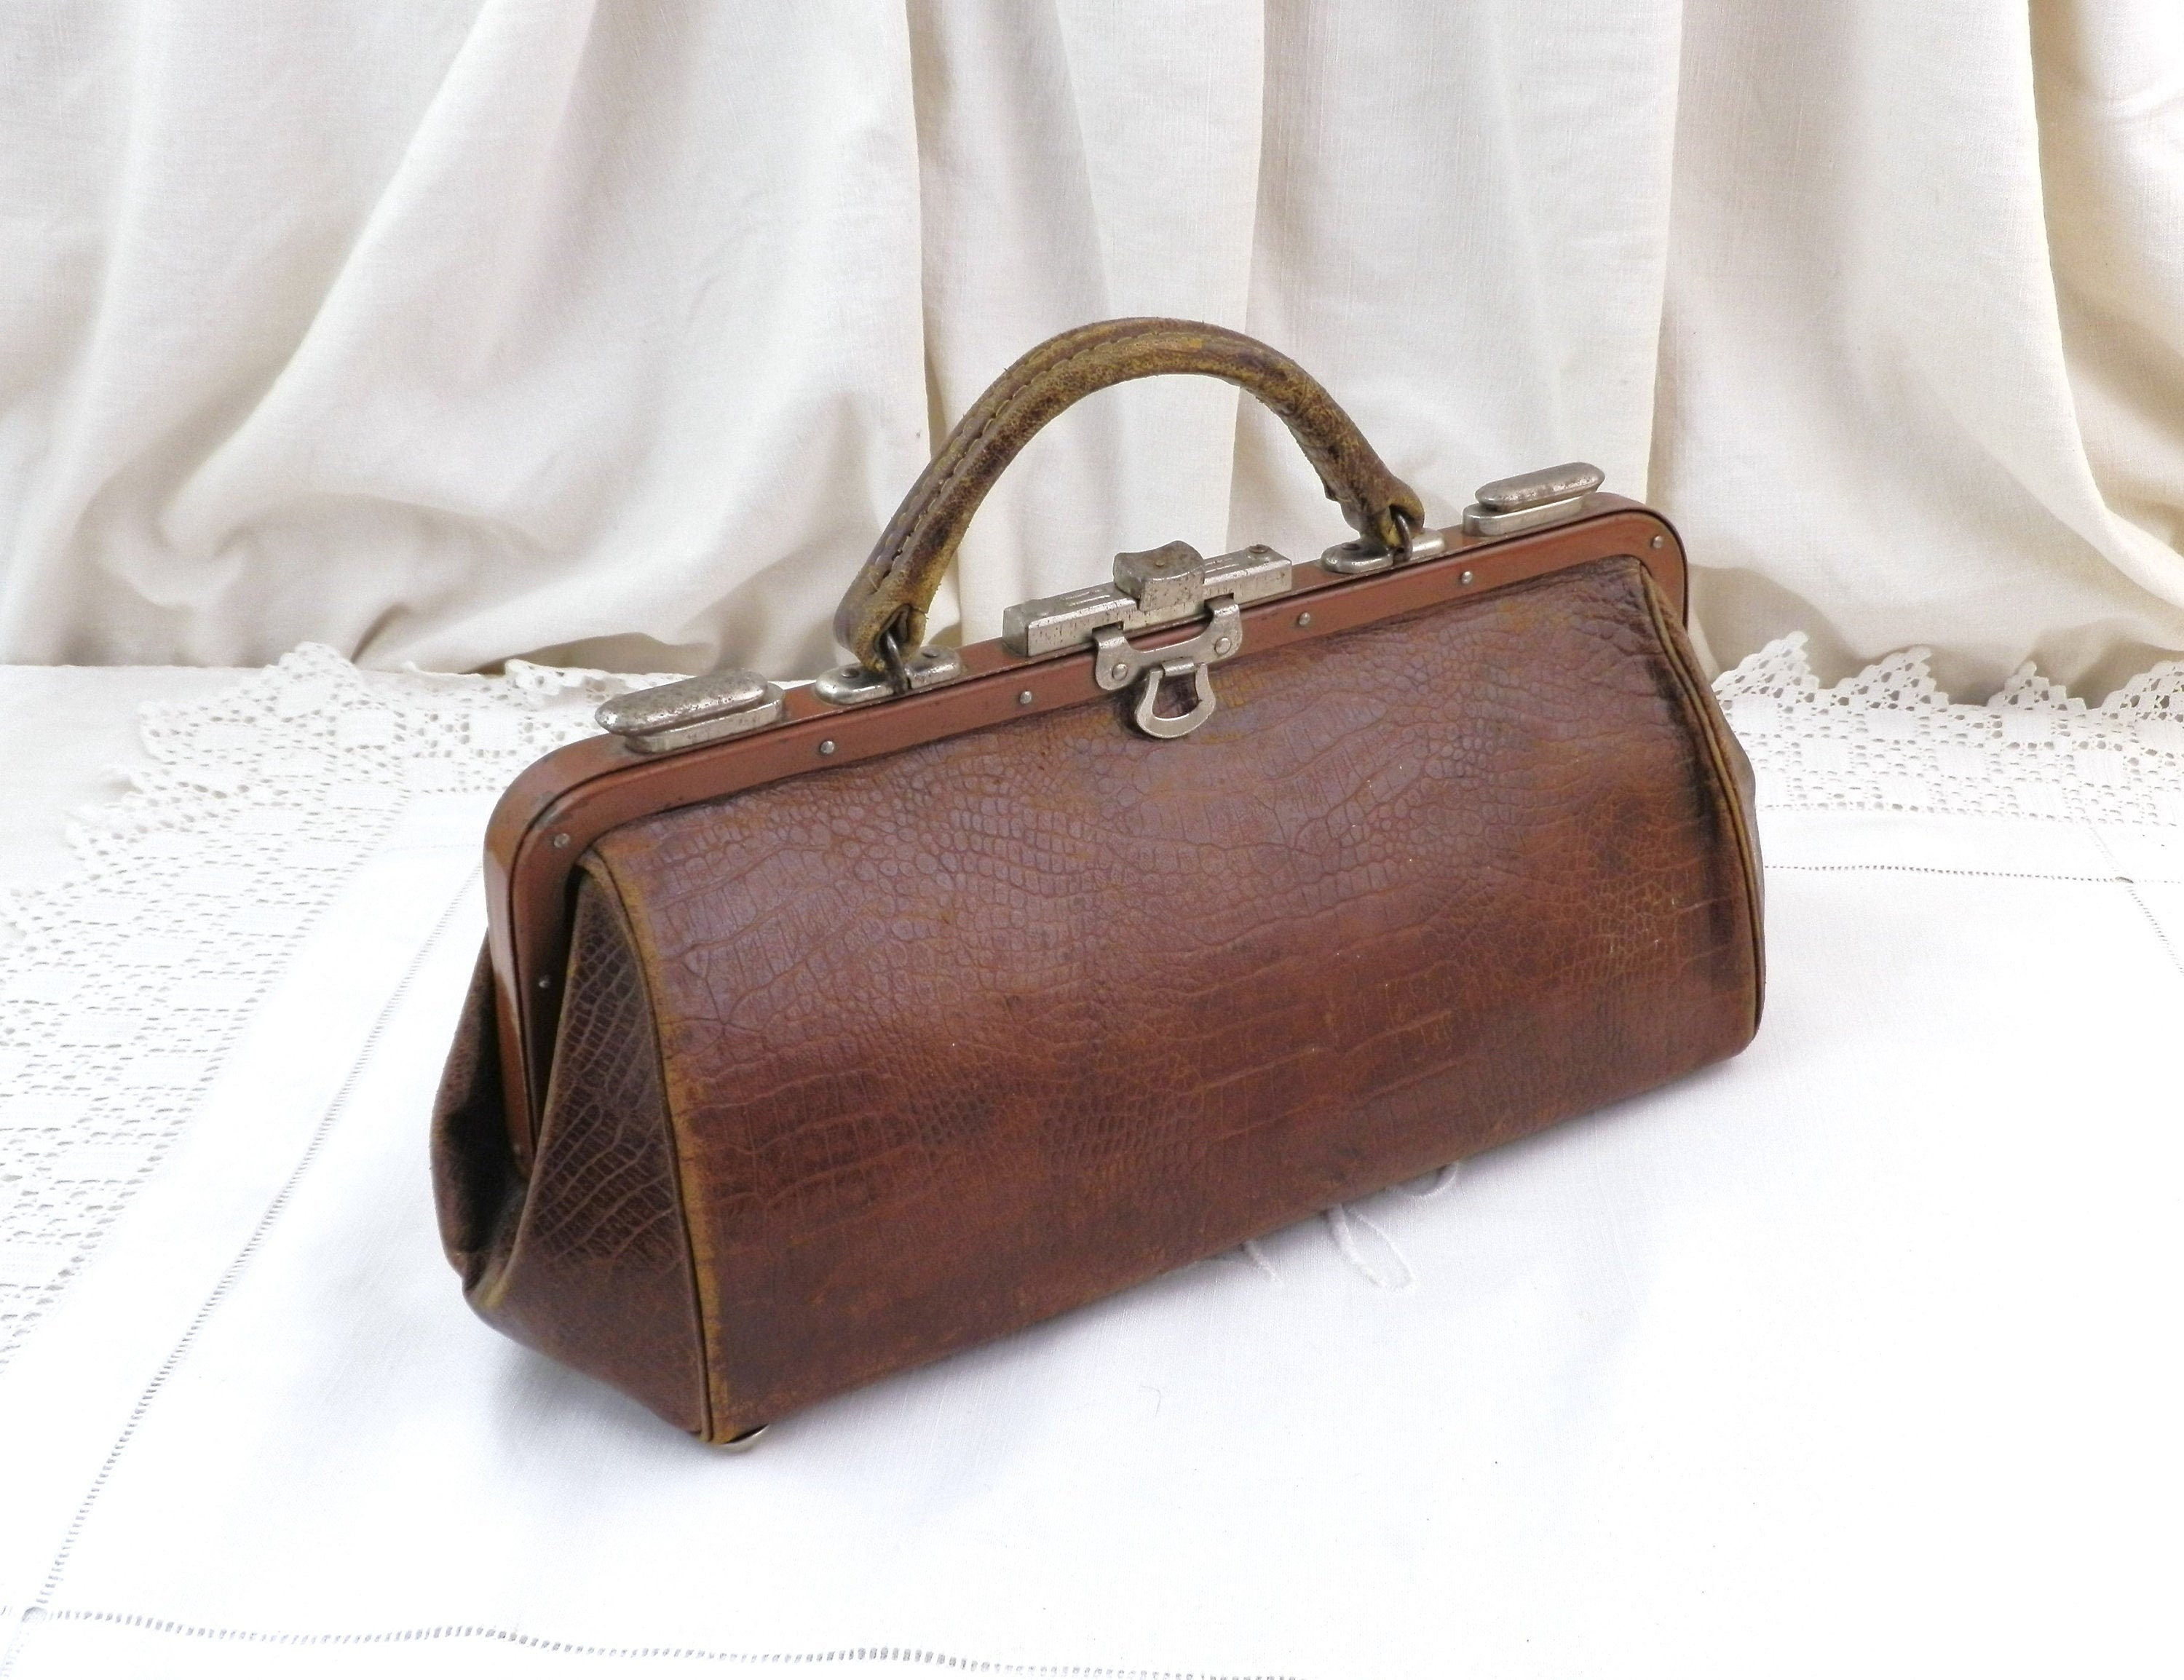 thefullerview  Bags, Gladstone bag, Leather bags handmade